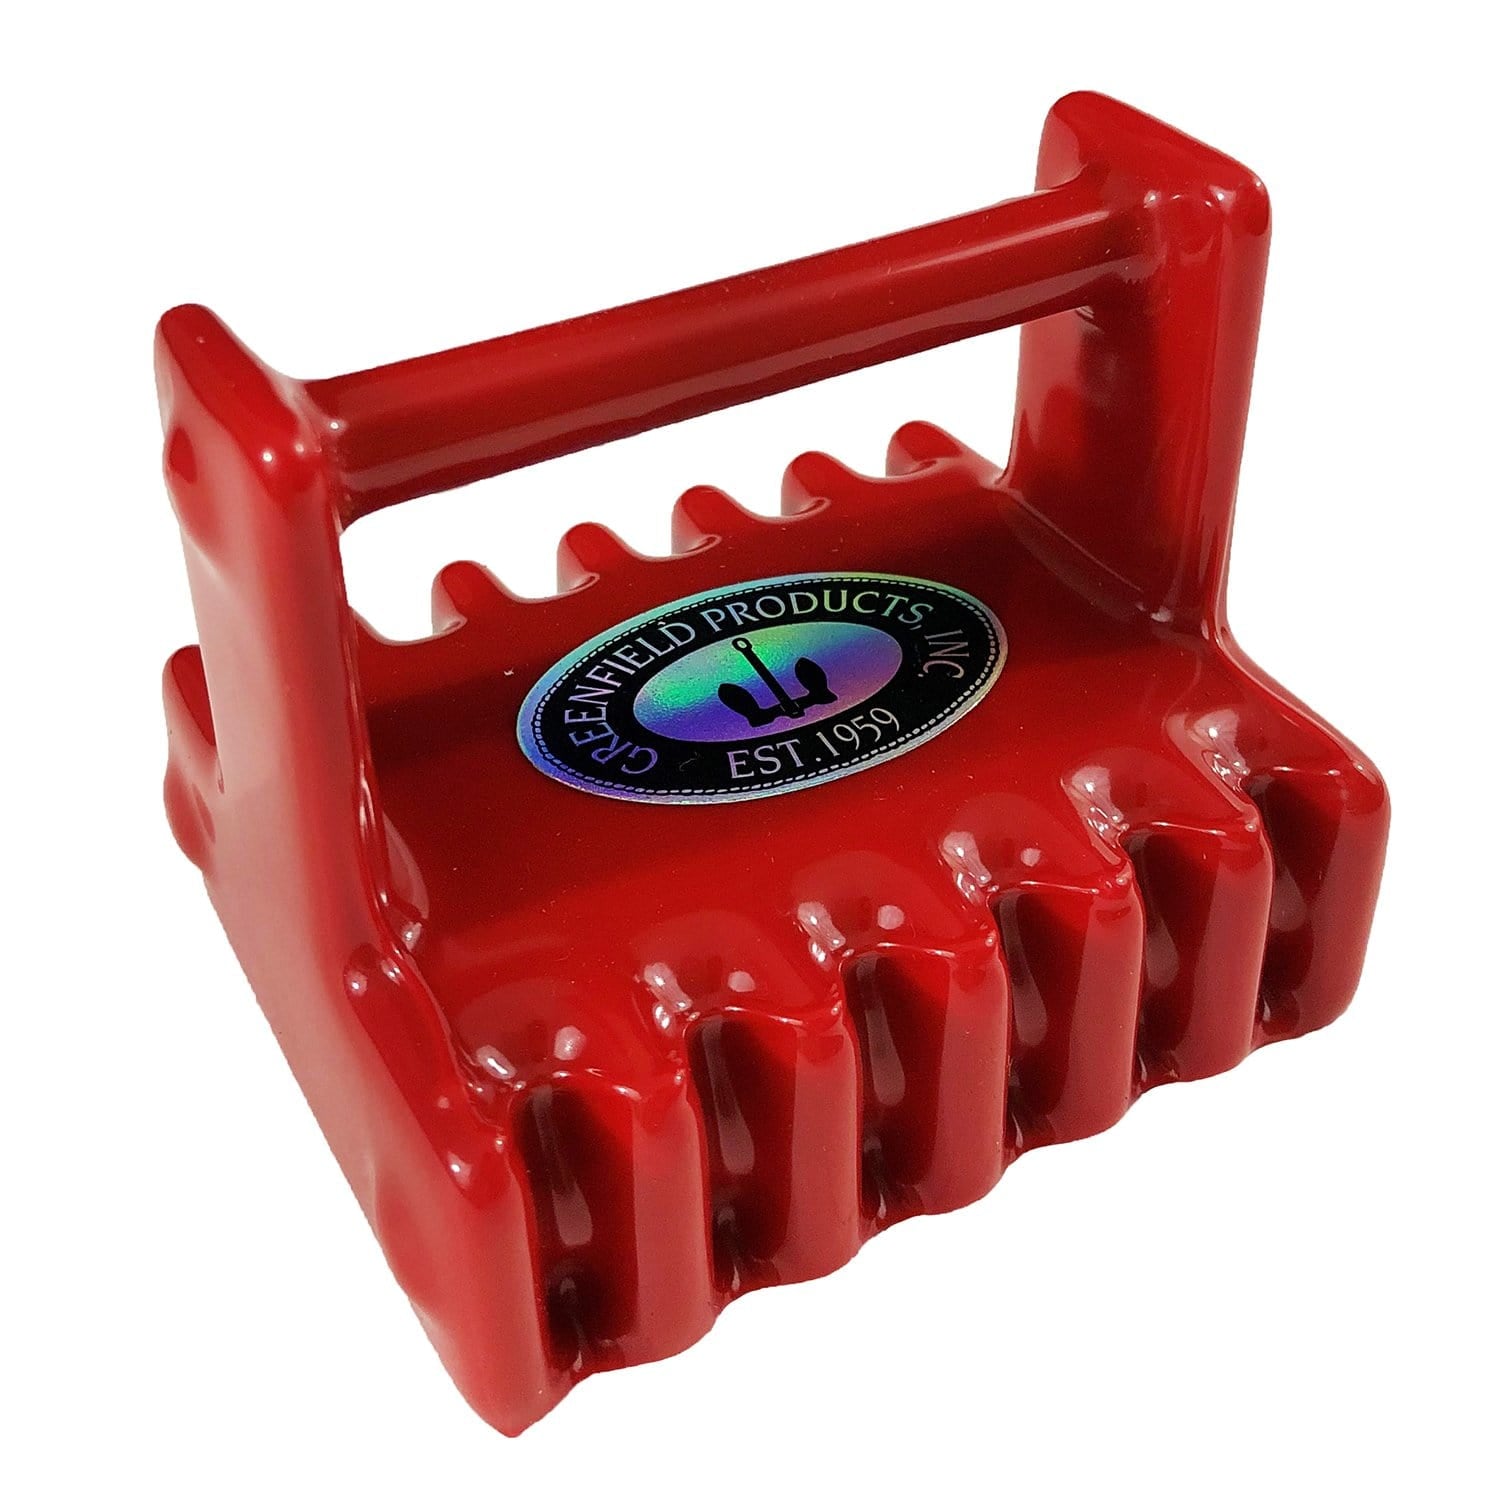 Greenfield 7 RD - 200 lbs Retrieval Magnet - Red